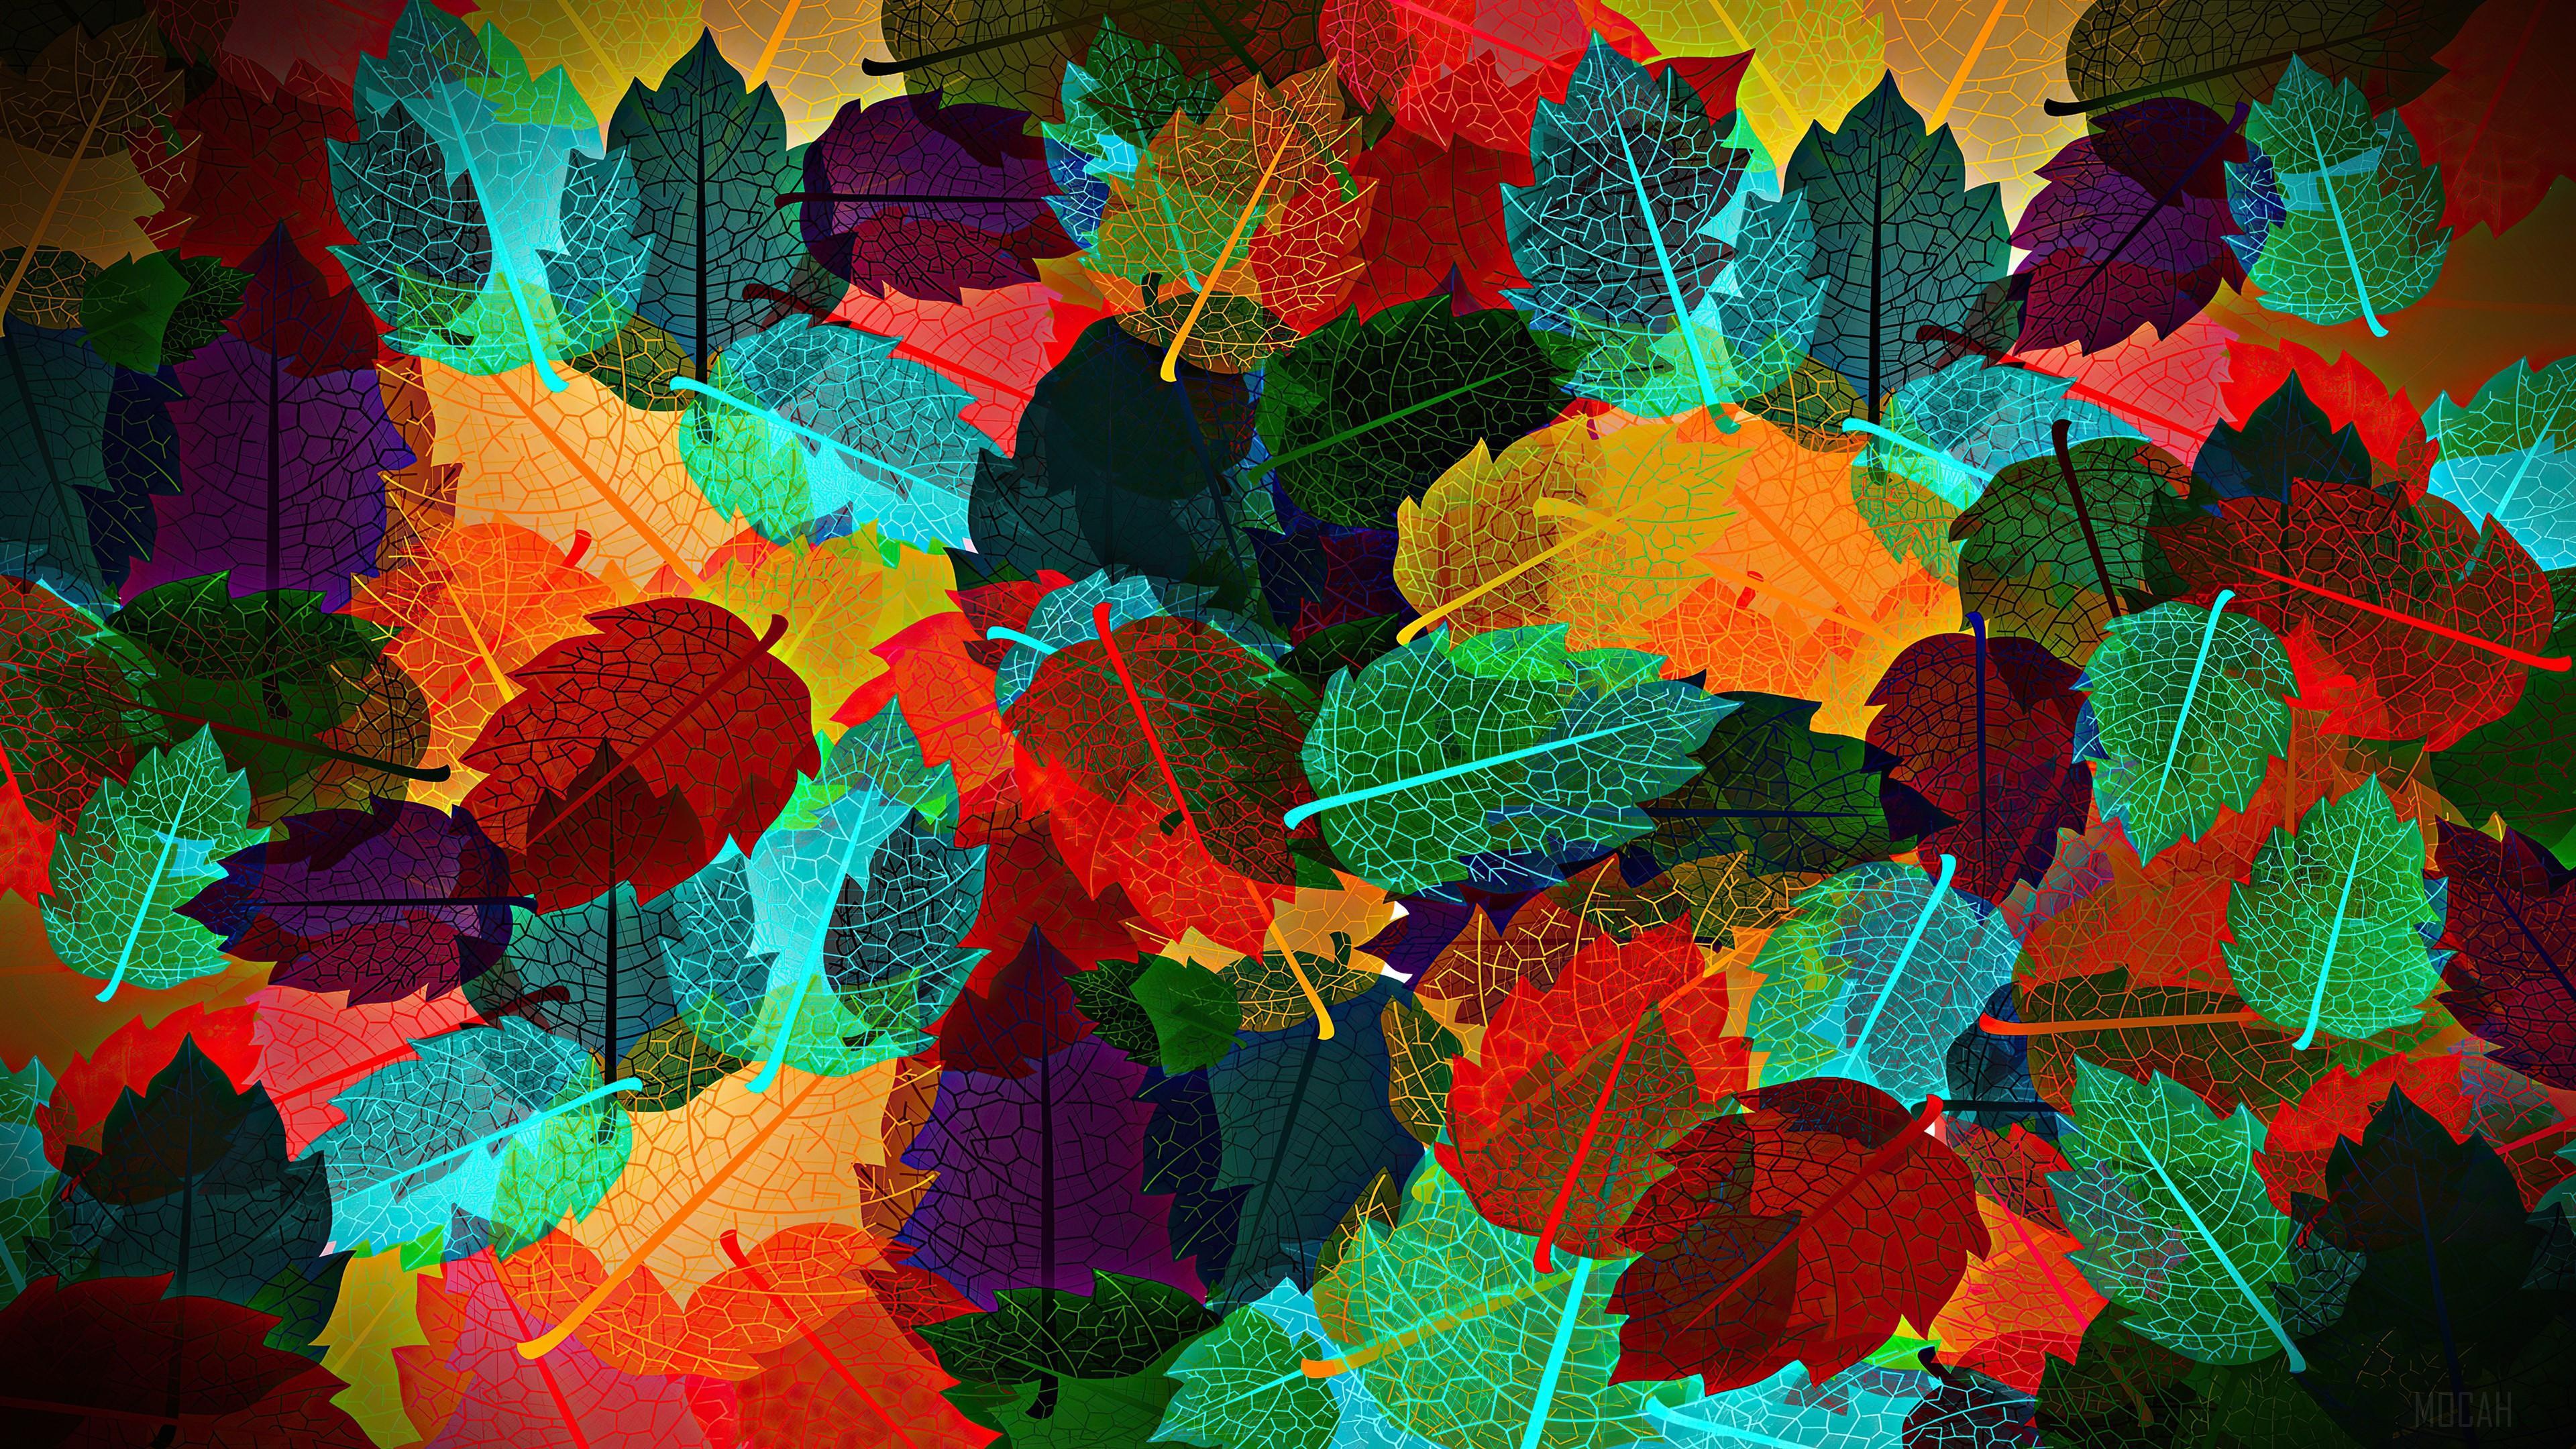 HD wallpaper, Abstract Autumn Leaves 4K